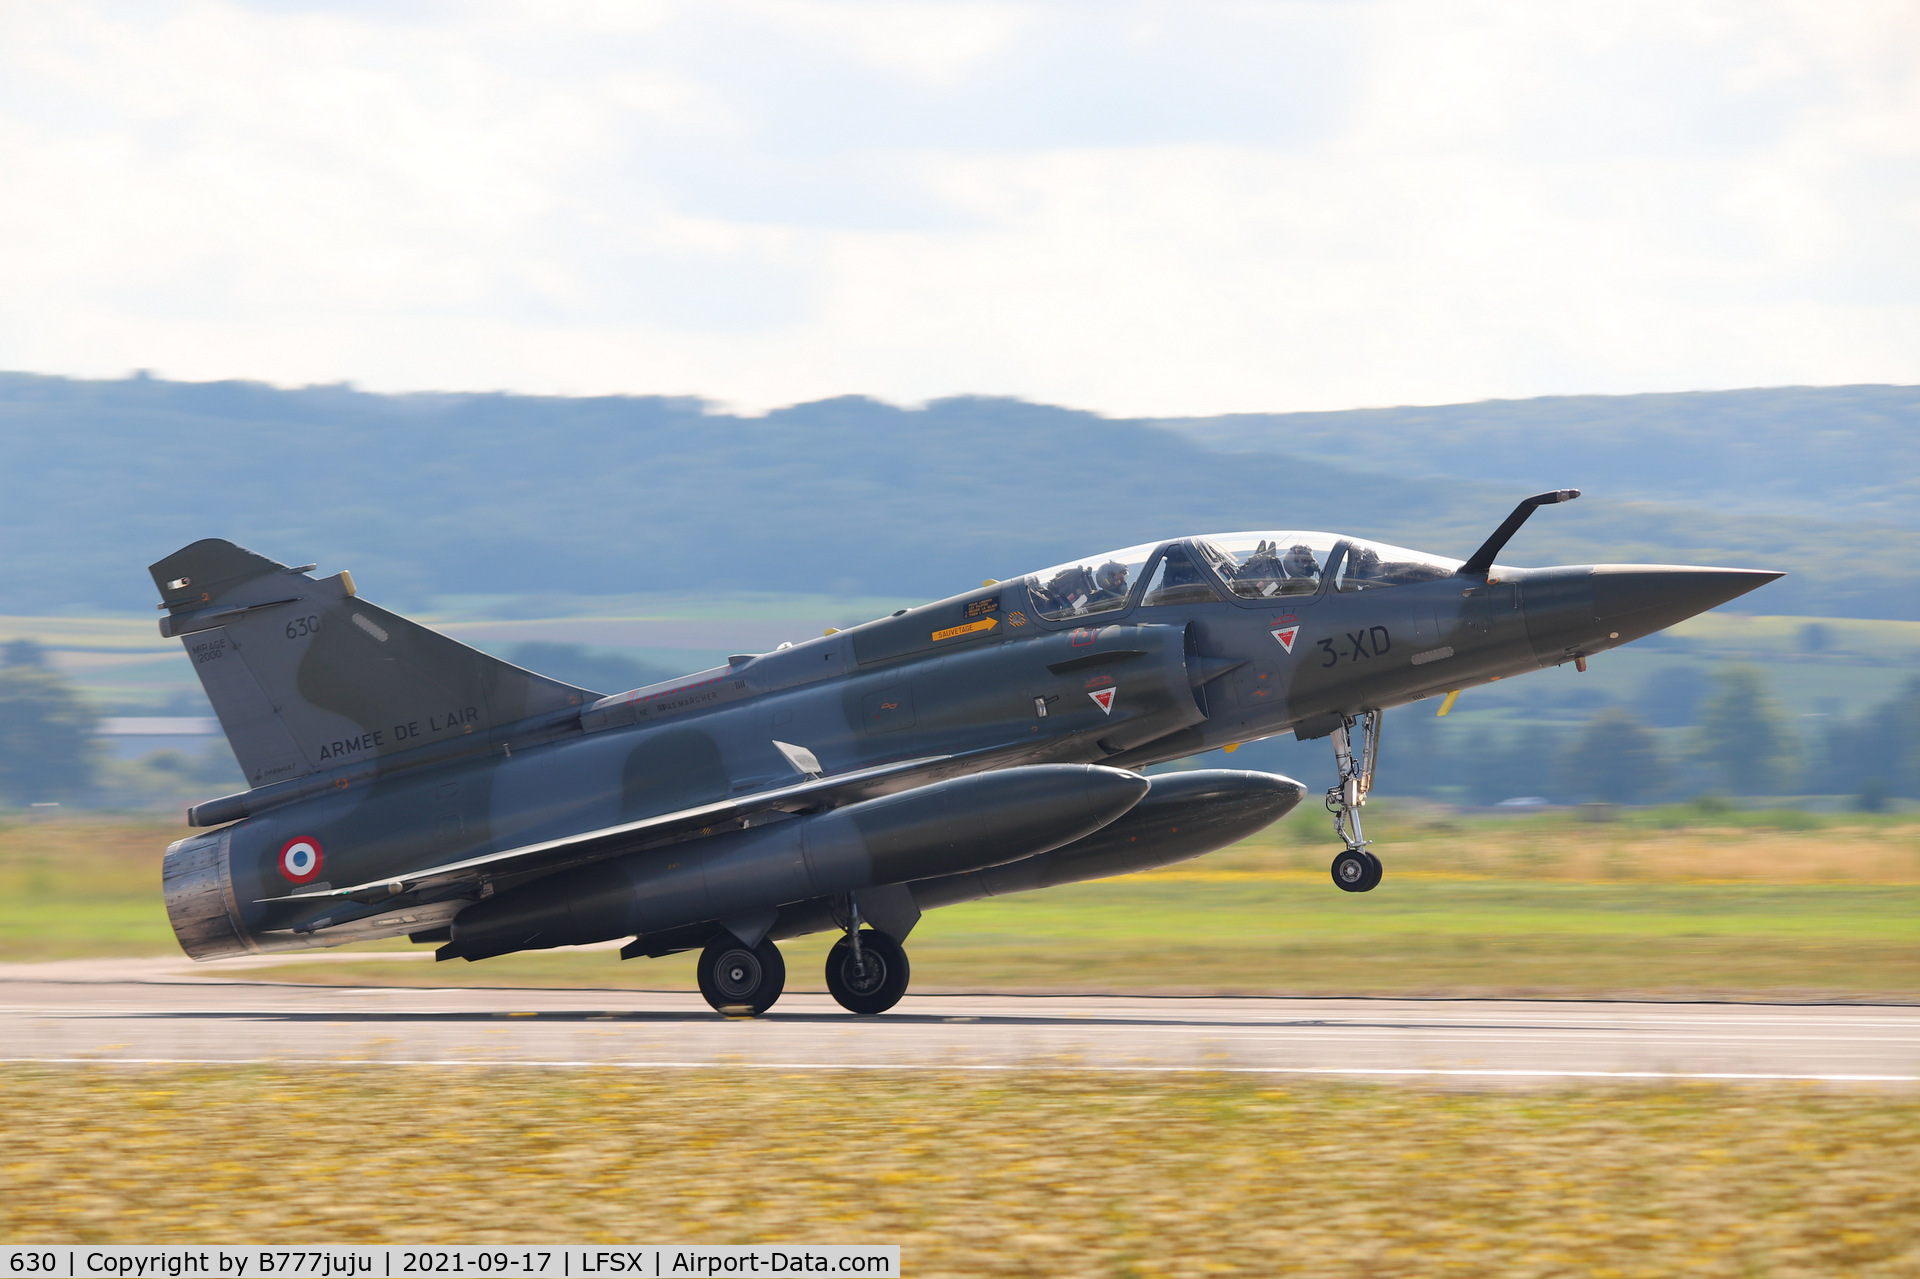 630, Dassault Mirage 2000D C/N 432, during Luxeuil Air Show 2021
new code 3-XD